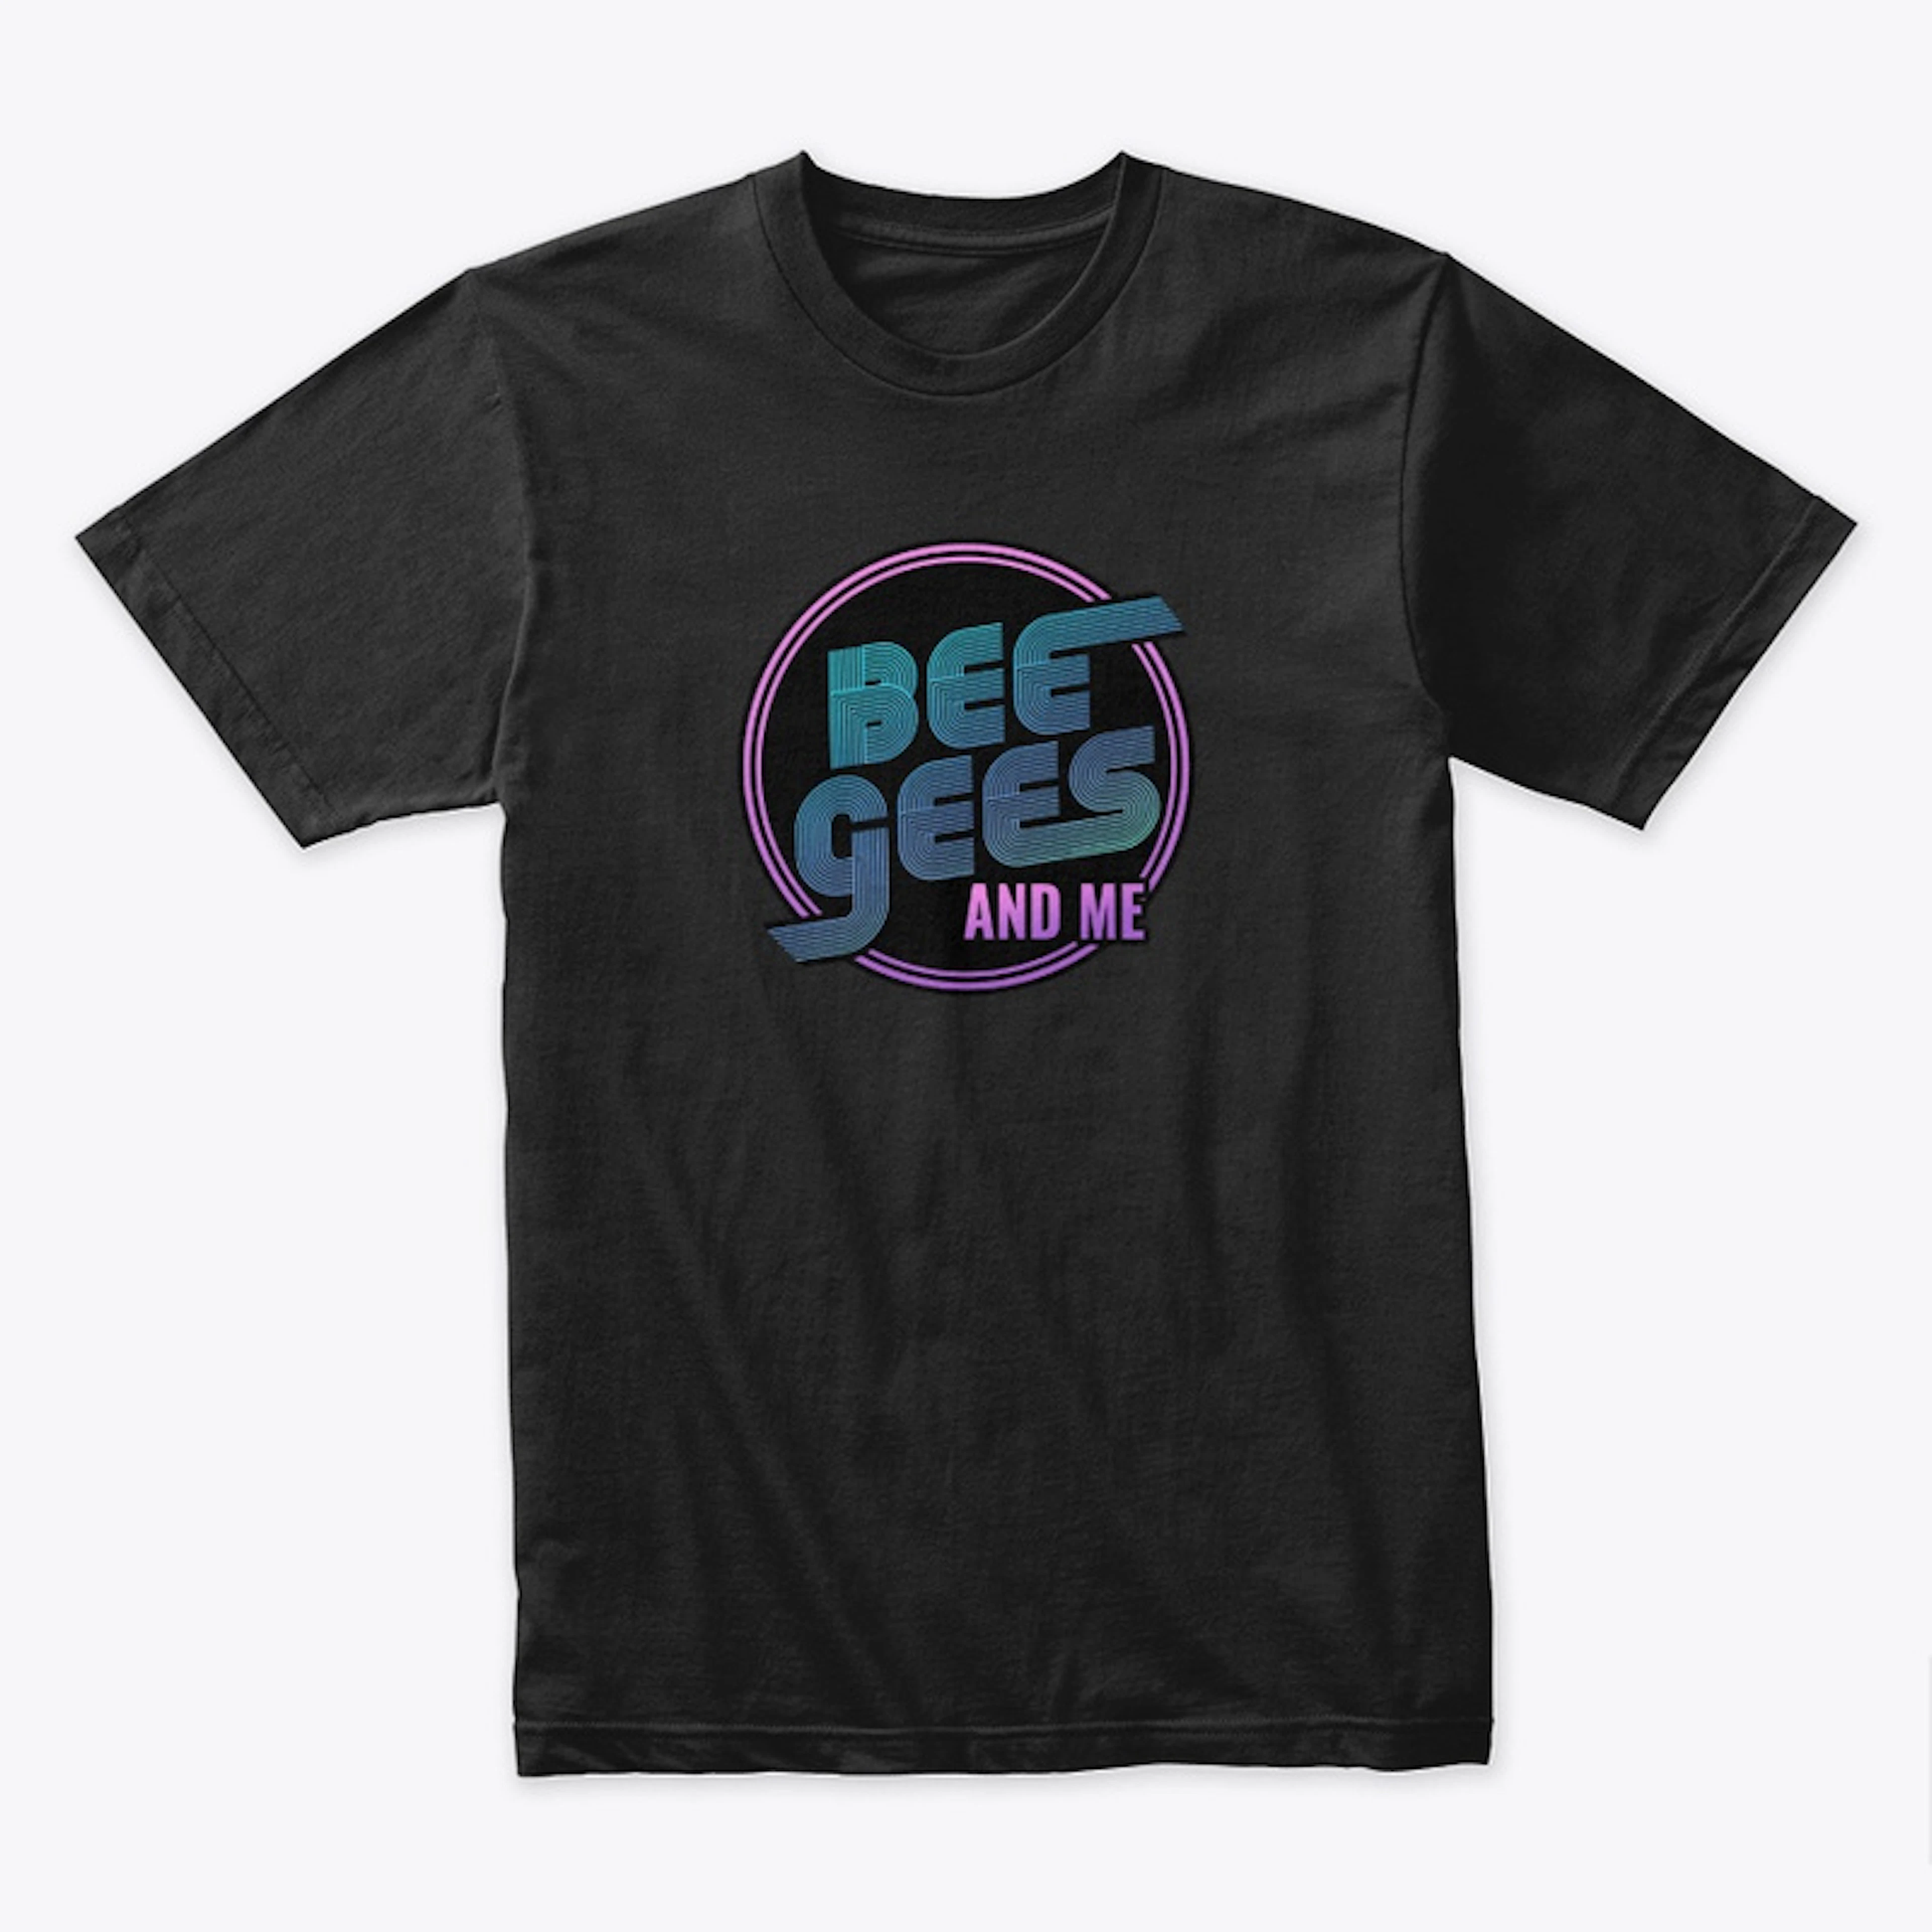 Bee Gees And Me Tee